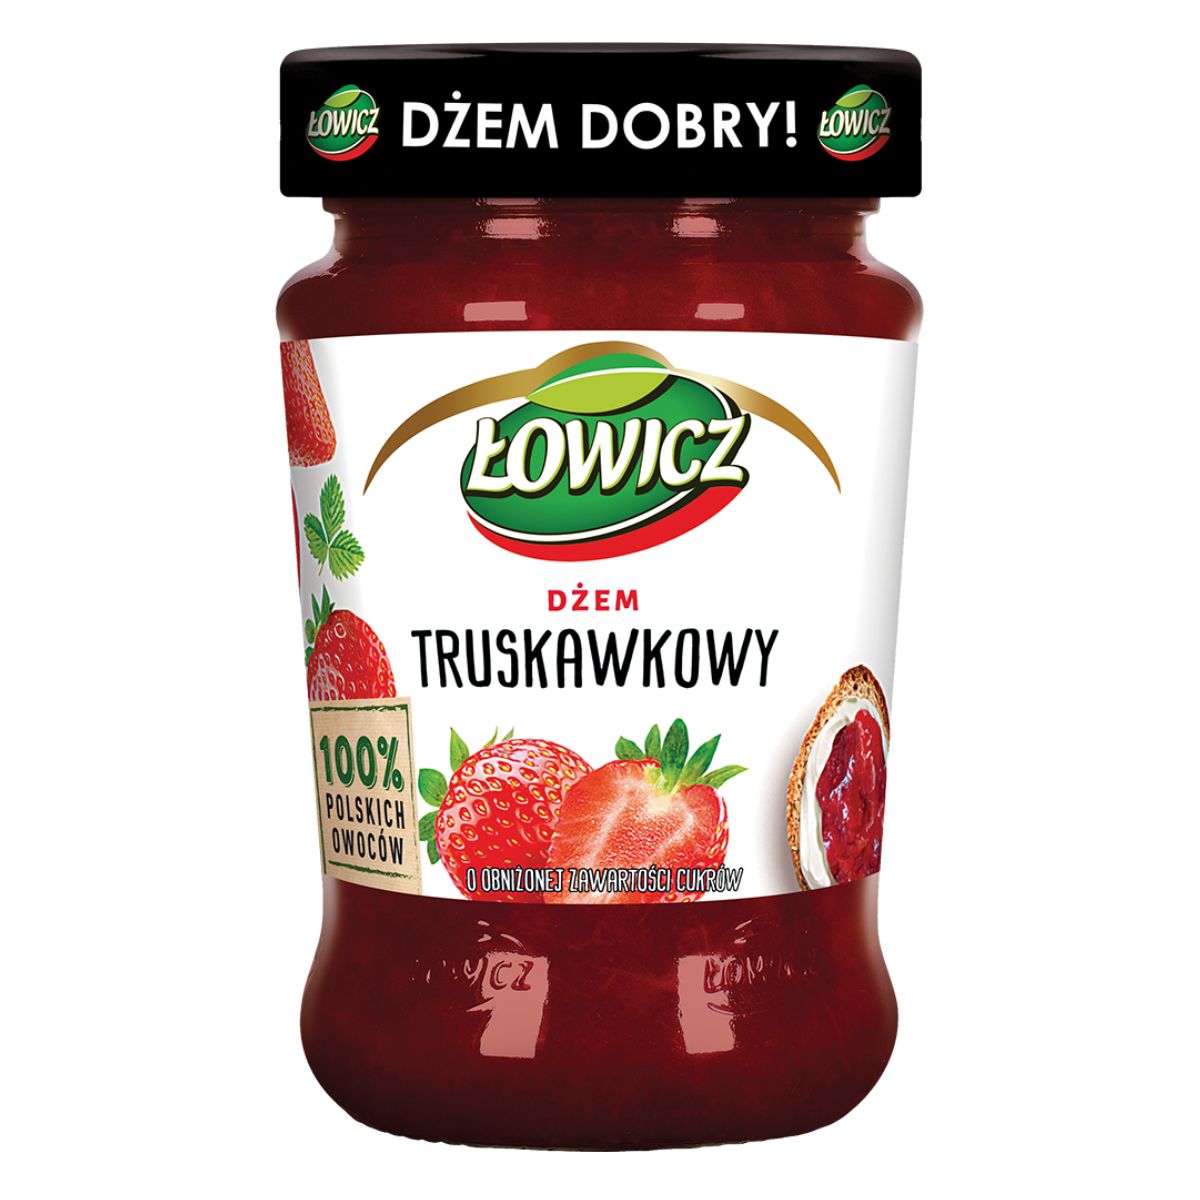 A Lowicz Strawberry Jam on a white background.